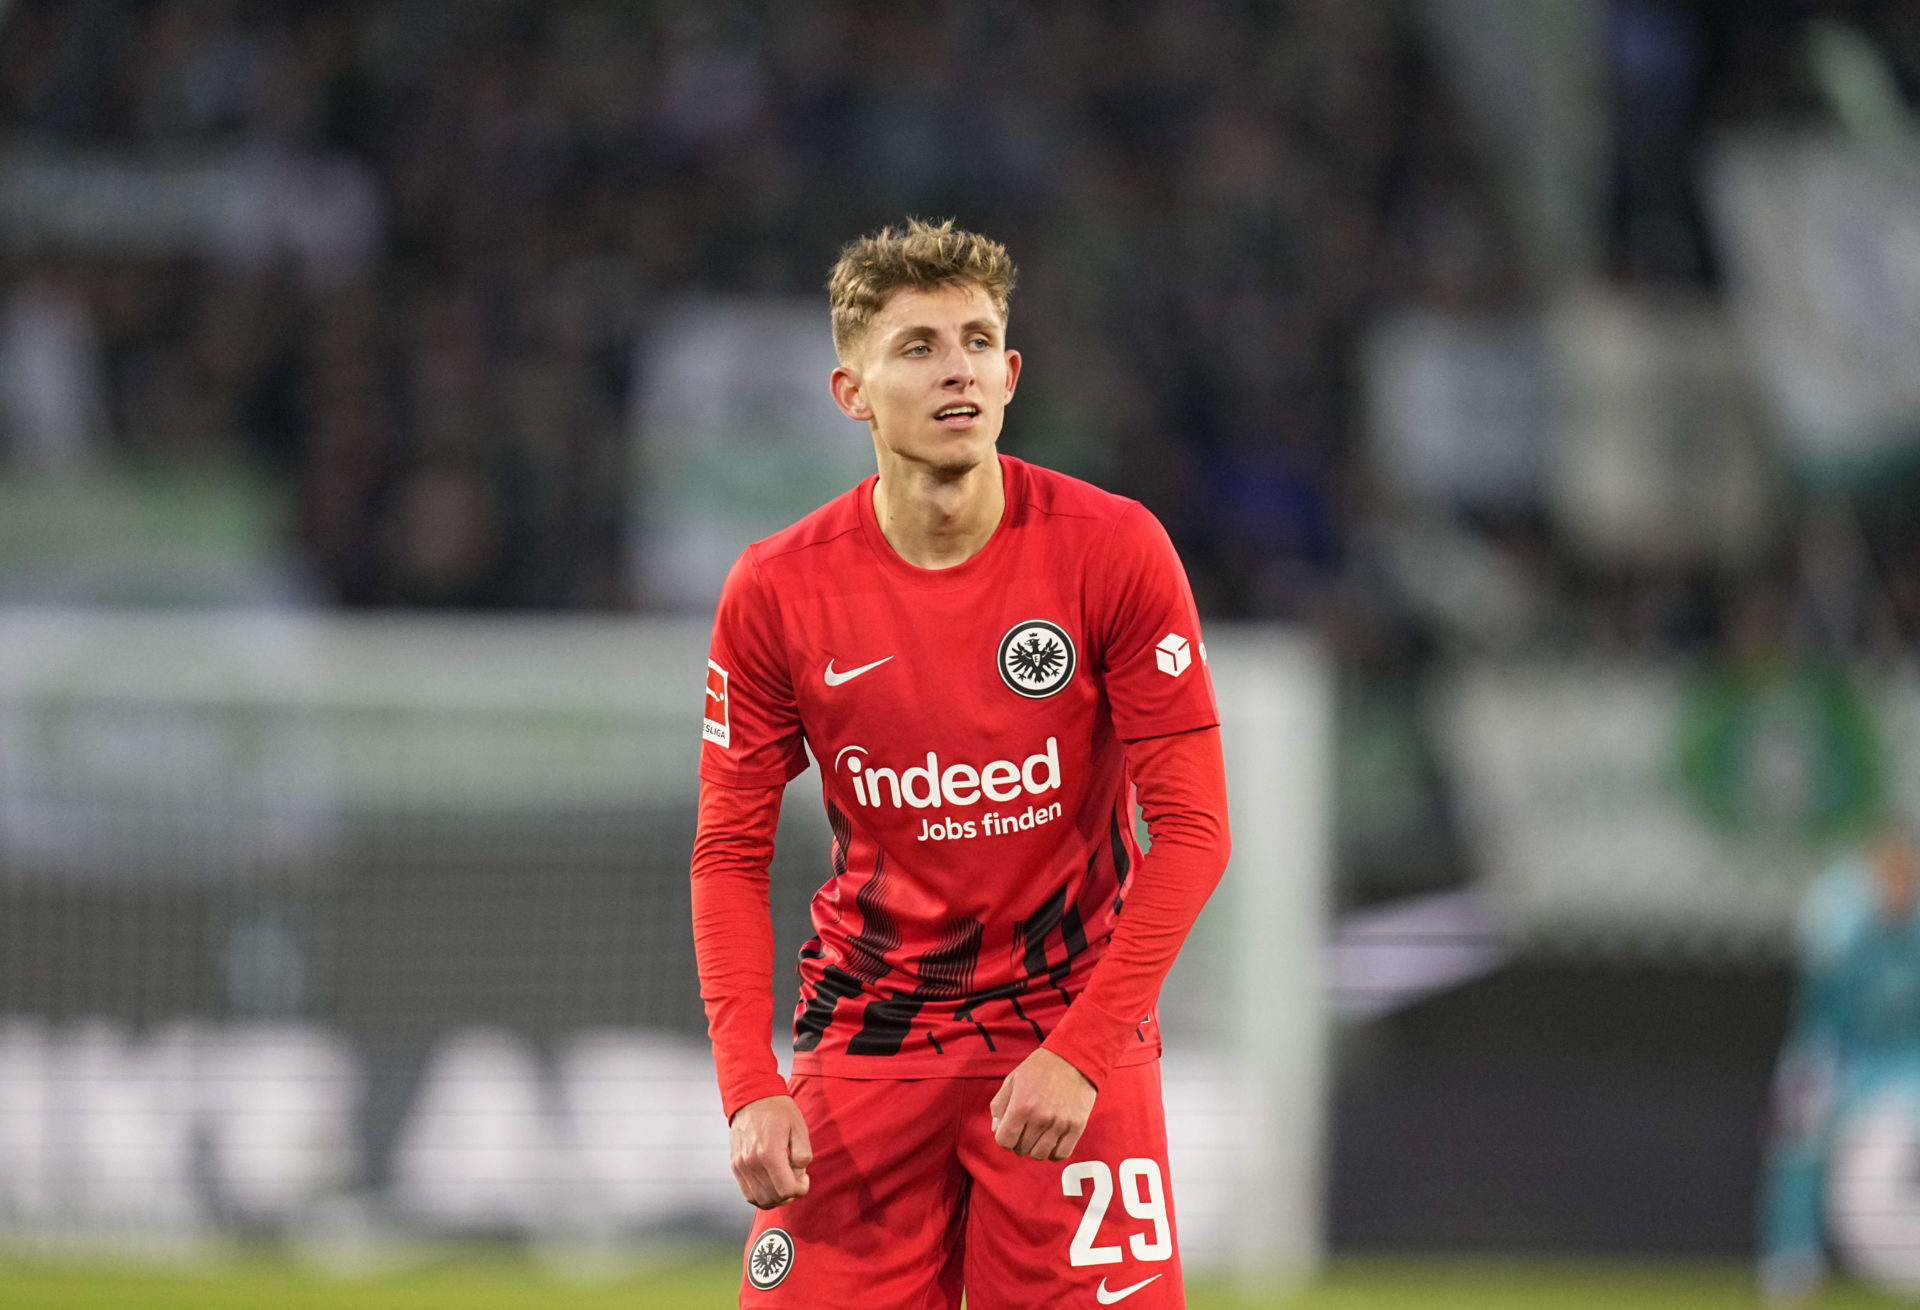 Napoli have sealed the deal for Jasper Lindstrom, and the departure of Hirving Lozano, who could be PSV-bound, is getting closer too